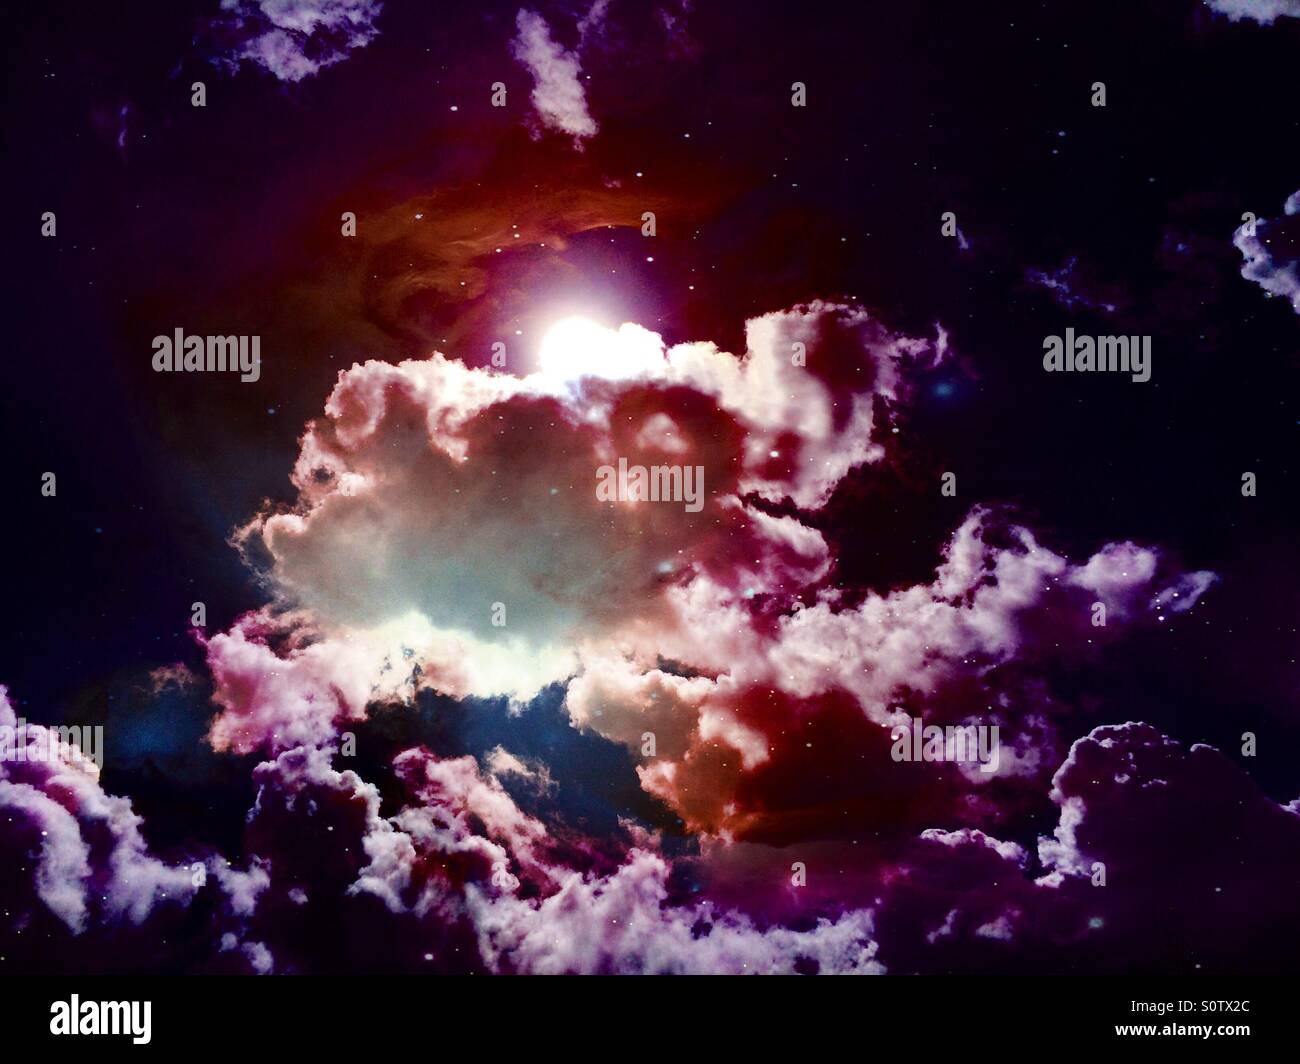 Dramatic purple sky with clouds and sun, with superimposed stars and nebulae Stock Photo